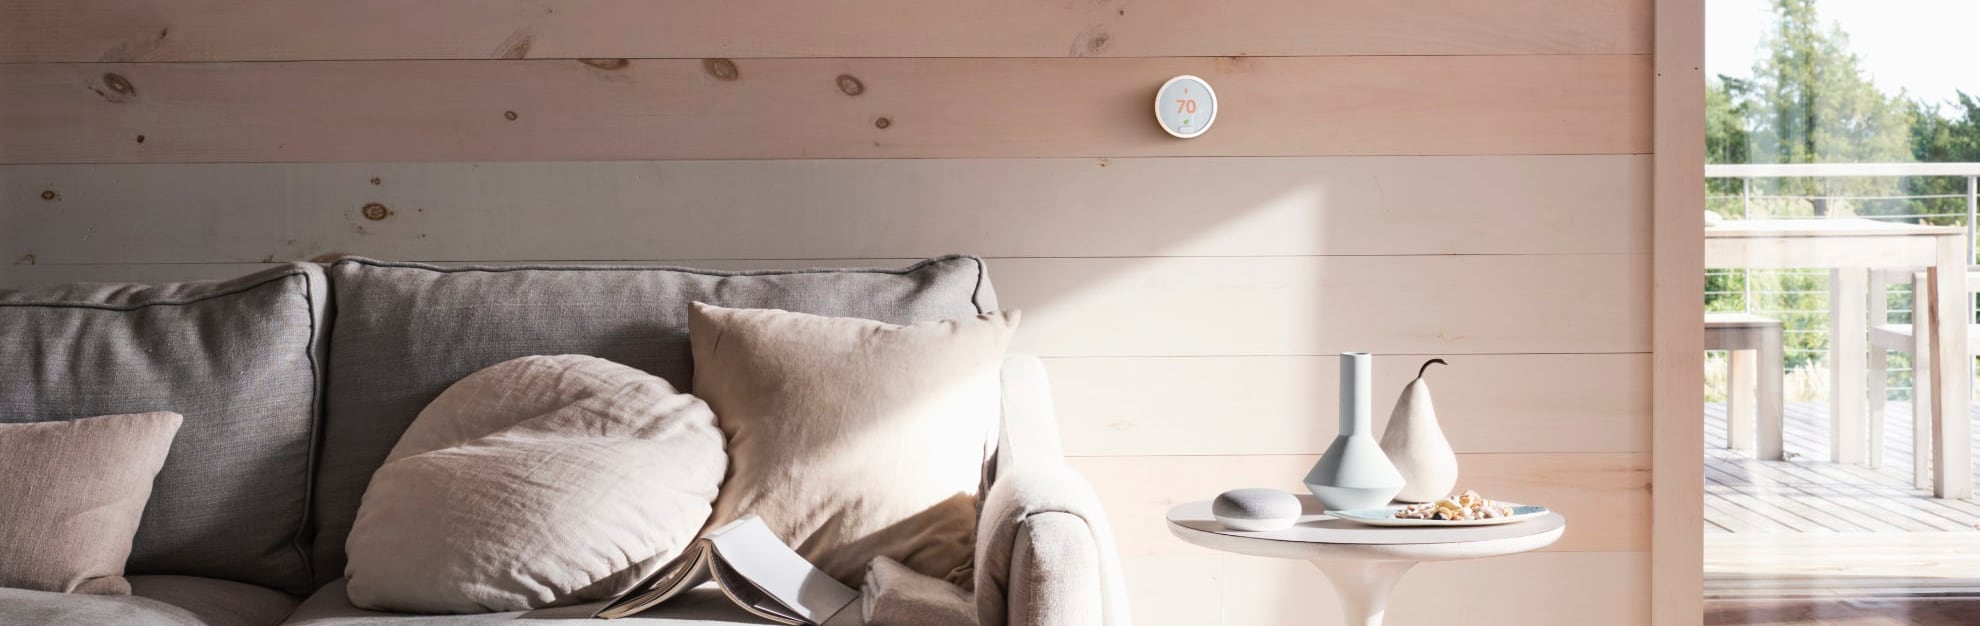 Vivint Home Automation in College Station